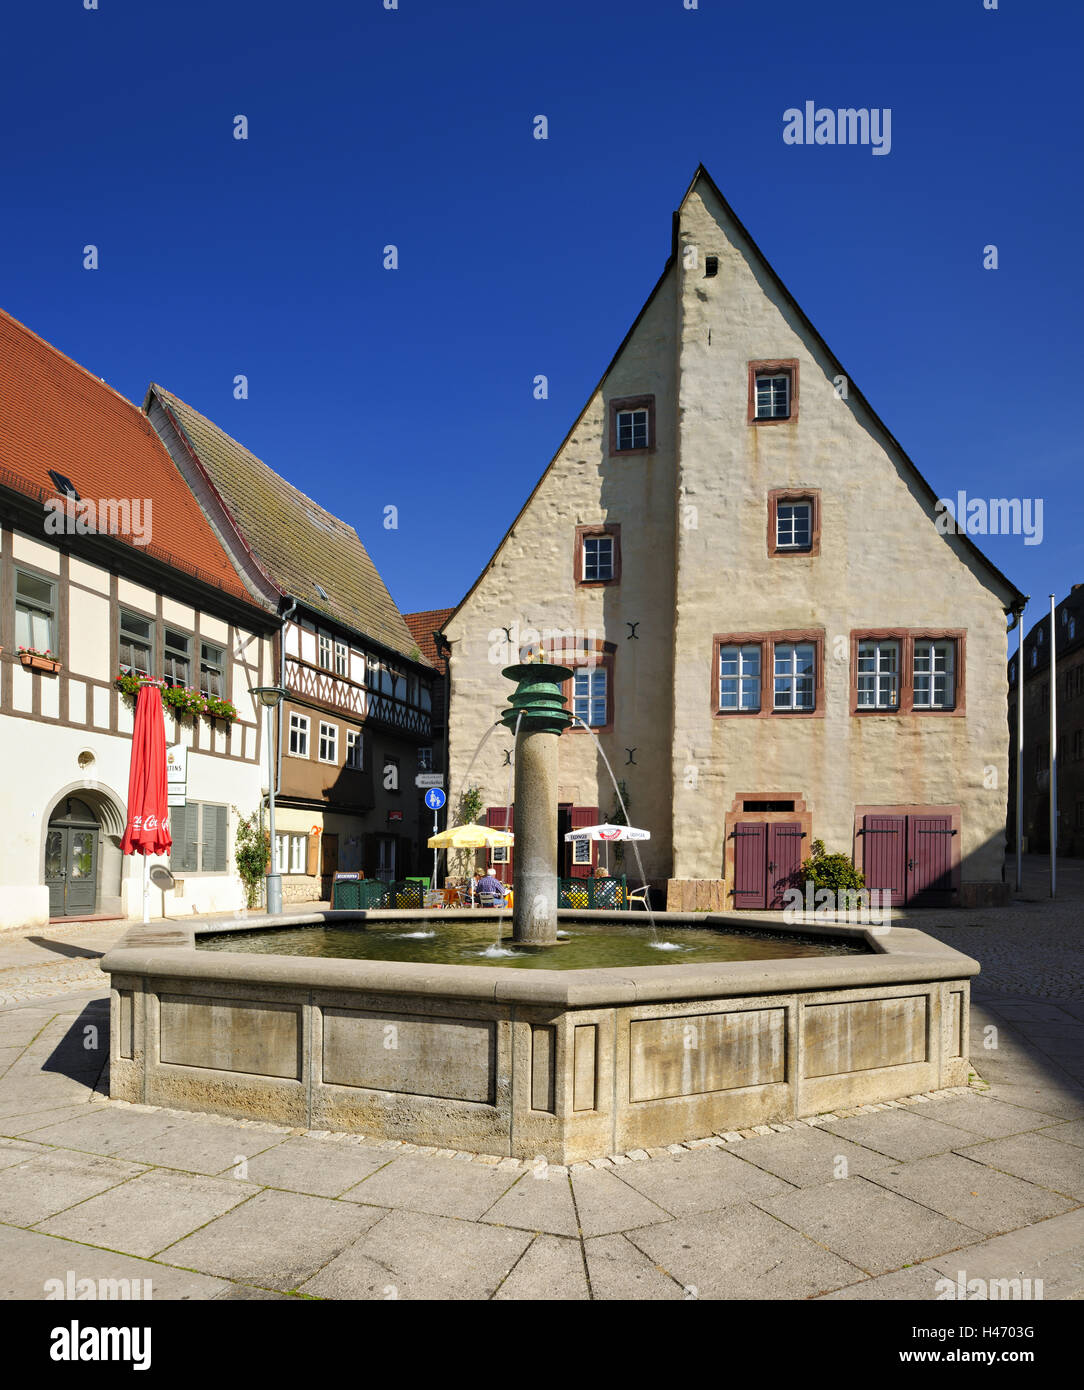 Germany, Saxony-Anhalt, Sangerhausen, city hall, well, romantically, medievally, typically, architectural style, half-timbered, Old Town, Idyll, architecture, tourism, south resin, place of interest, street, lane, half-timbered houses, historically, marke Stock Photo